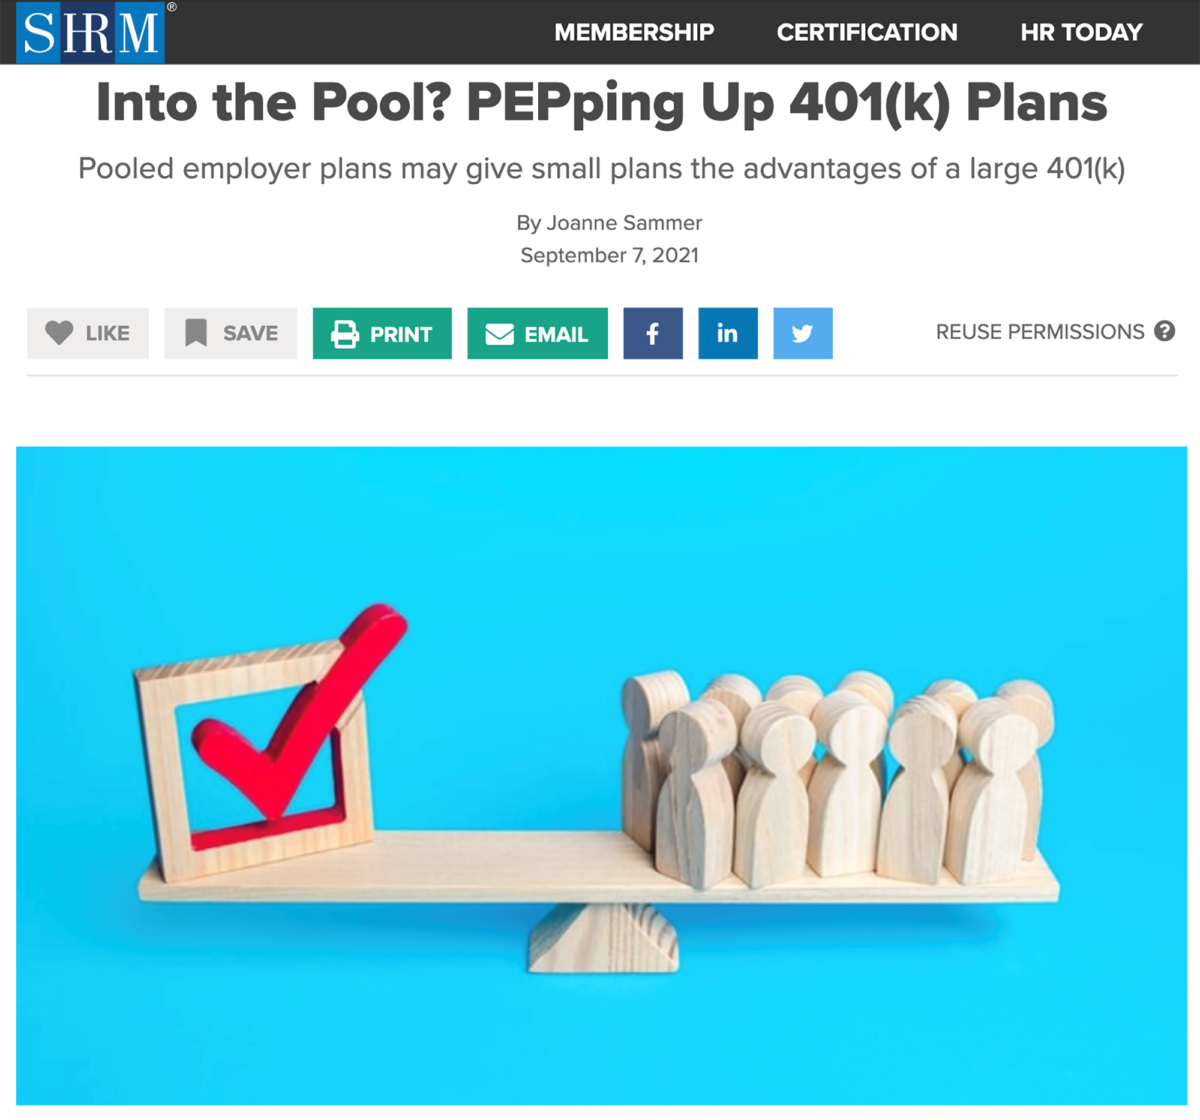 SHRM Quotes SVP Joe Sellitto in an Article on Pooled Employer Plans